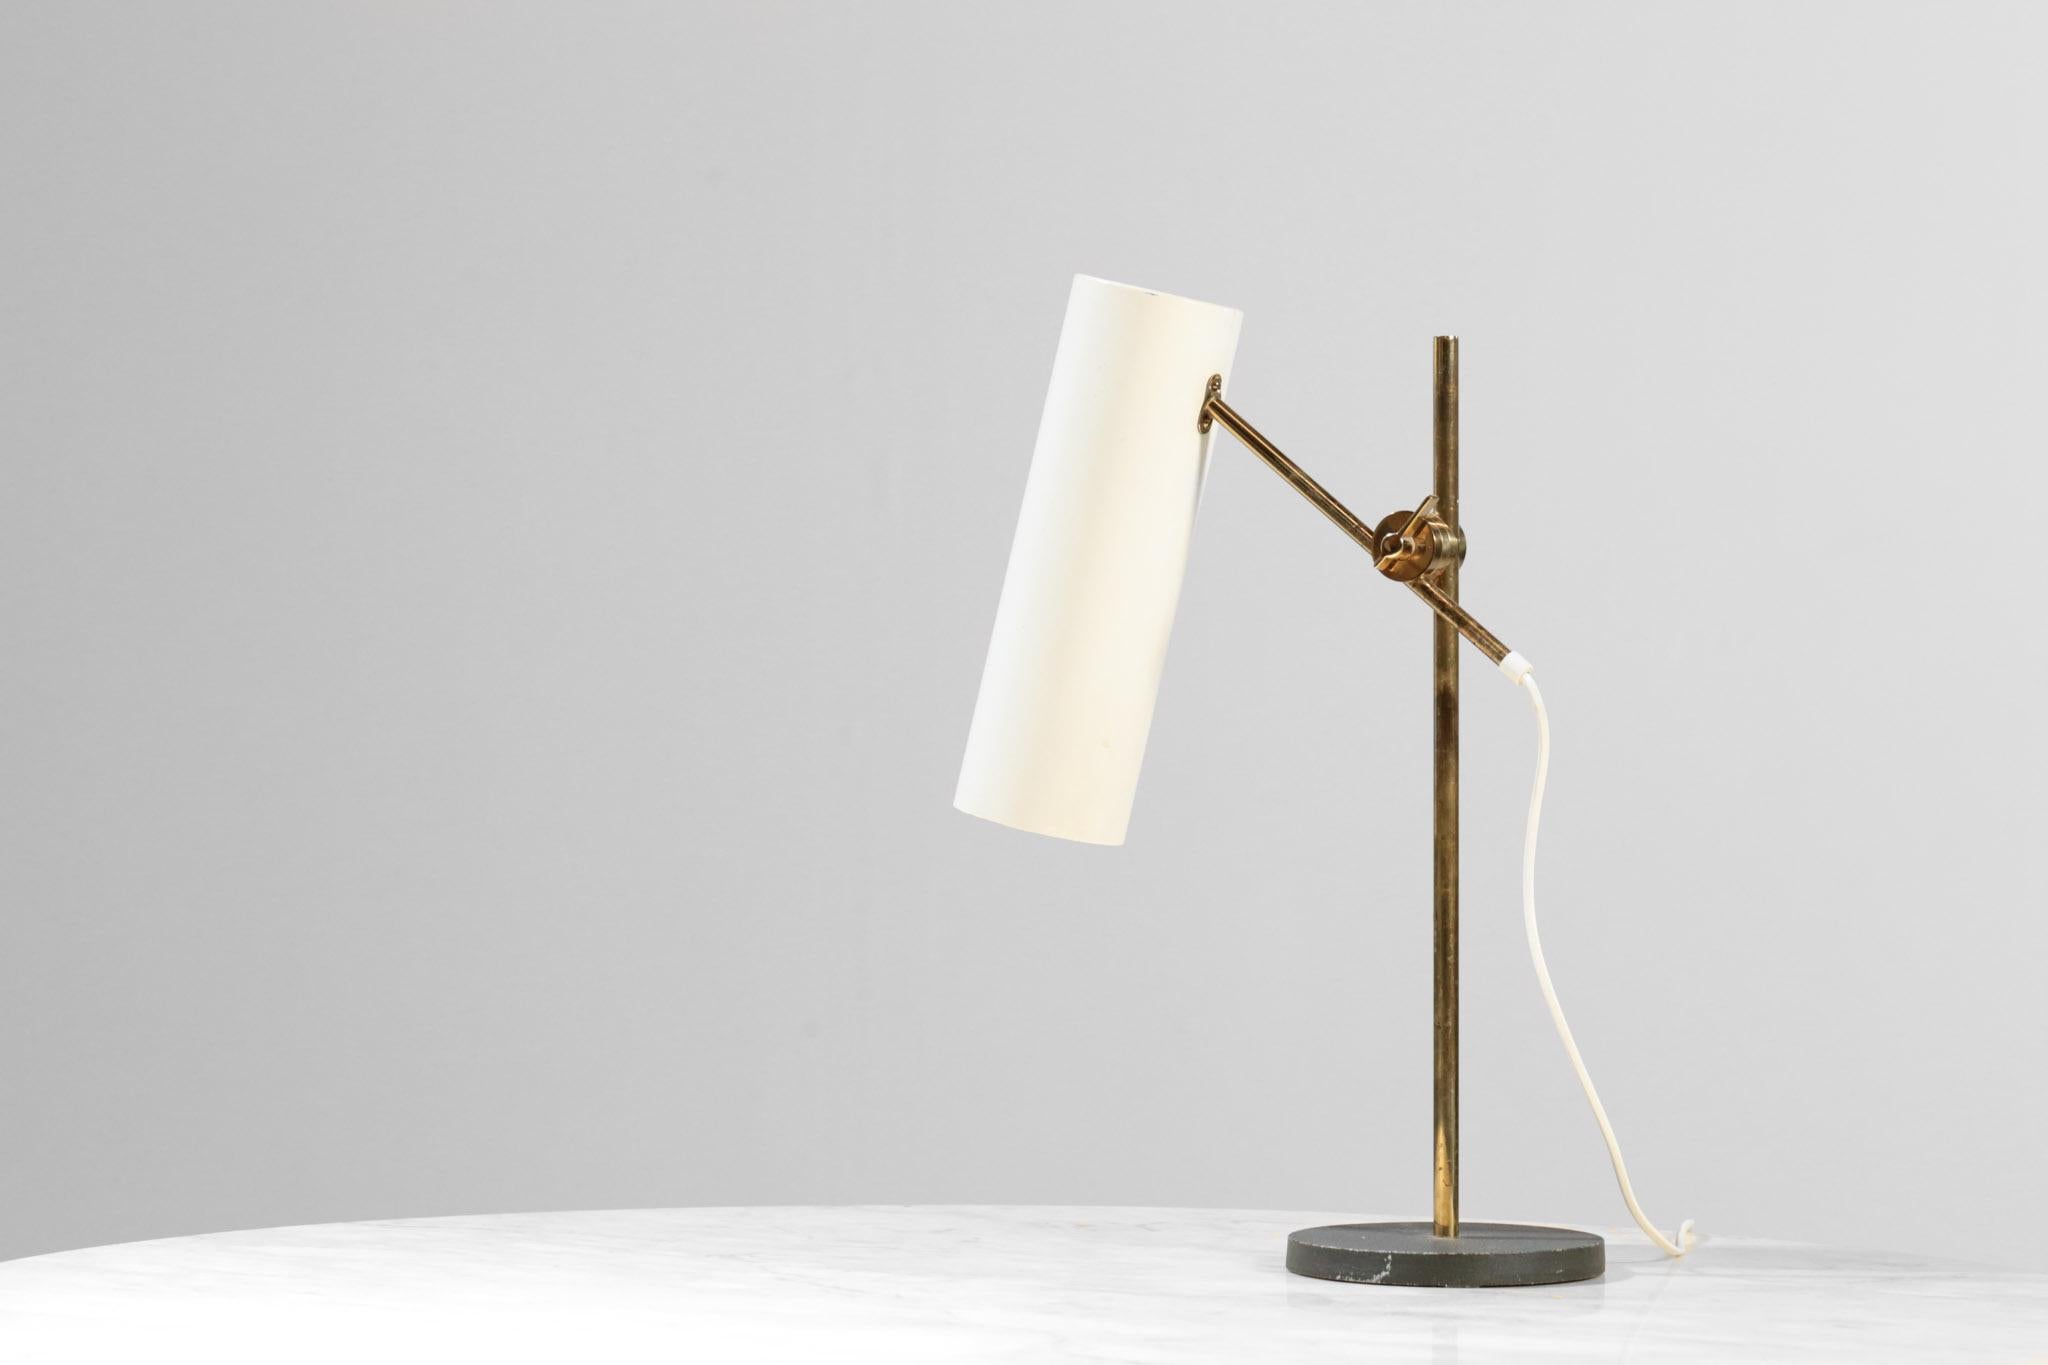 Vintage table lamp off white from 1960s.
Adjustable system.
Measures: Shade height 28 cm / diameter 9 cm.